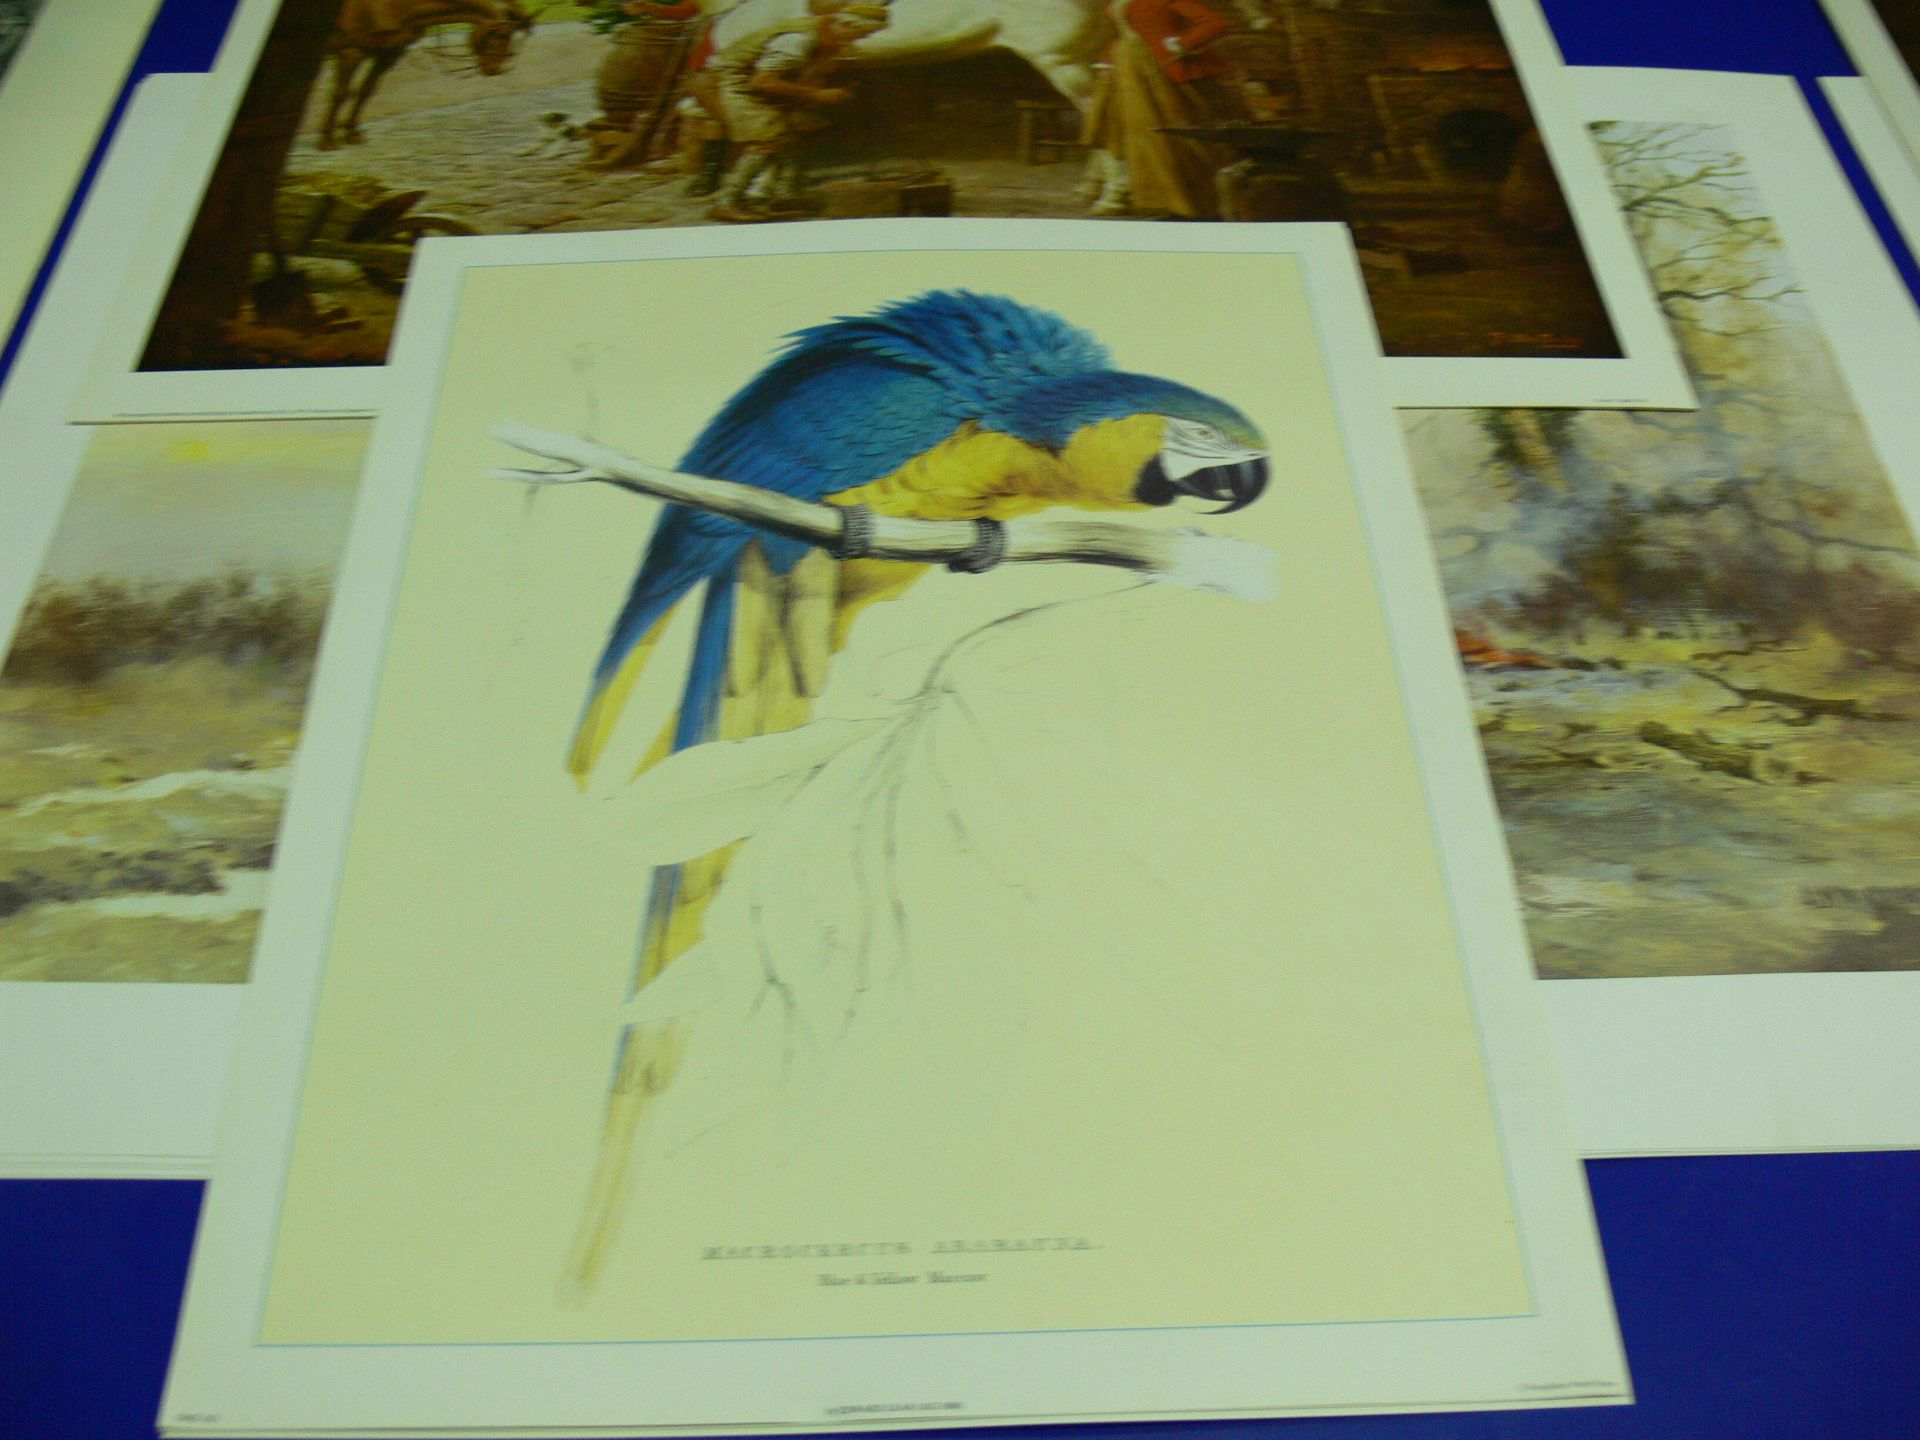 Five copies each of three coloured prints. 'The Forge' by Fortunino Matania (47cm x 56cm), 'Clearing - Image 5 of 8